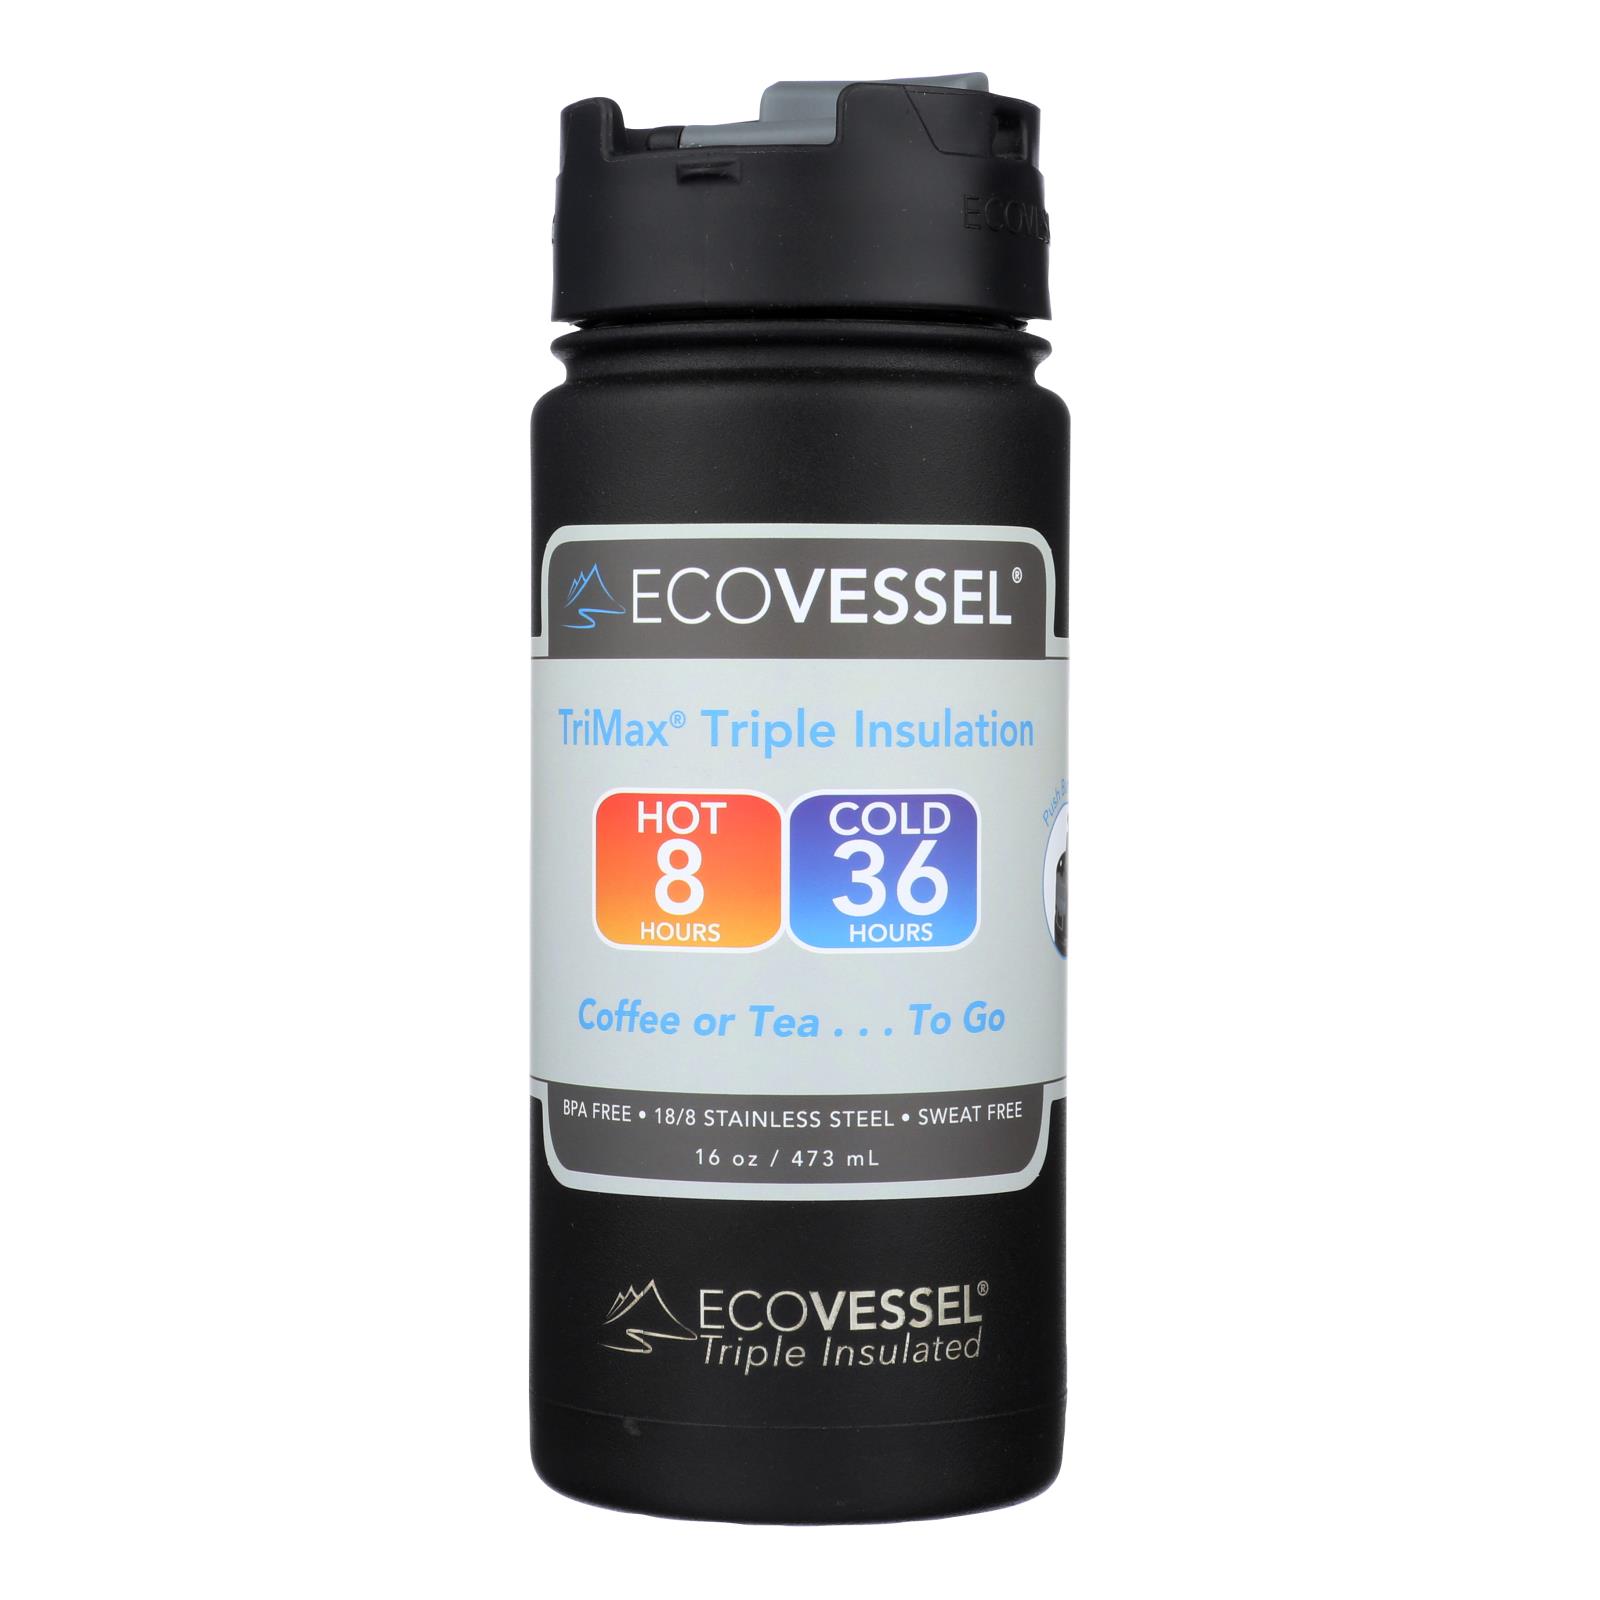 Ecovessel Trimax Triple Insulation Water Bottles - 6개 묶음상품 - 16 OZ